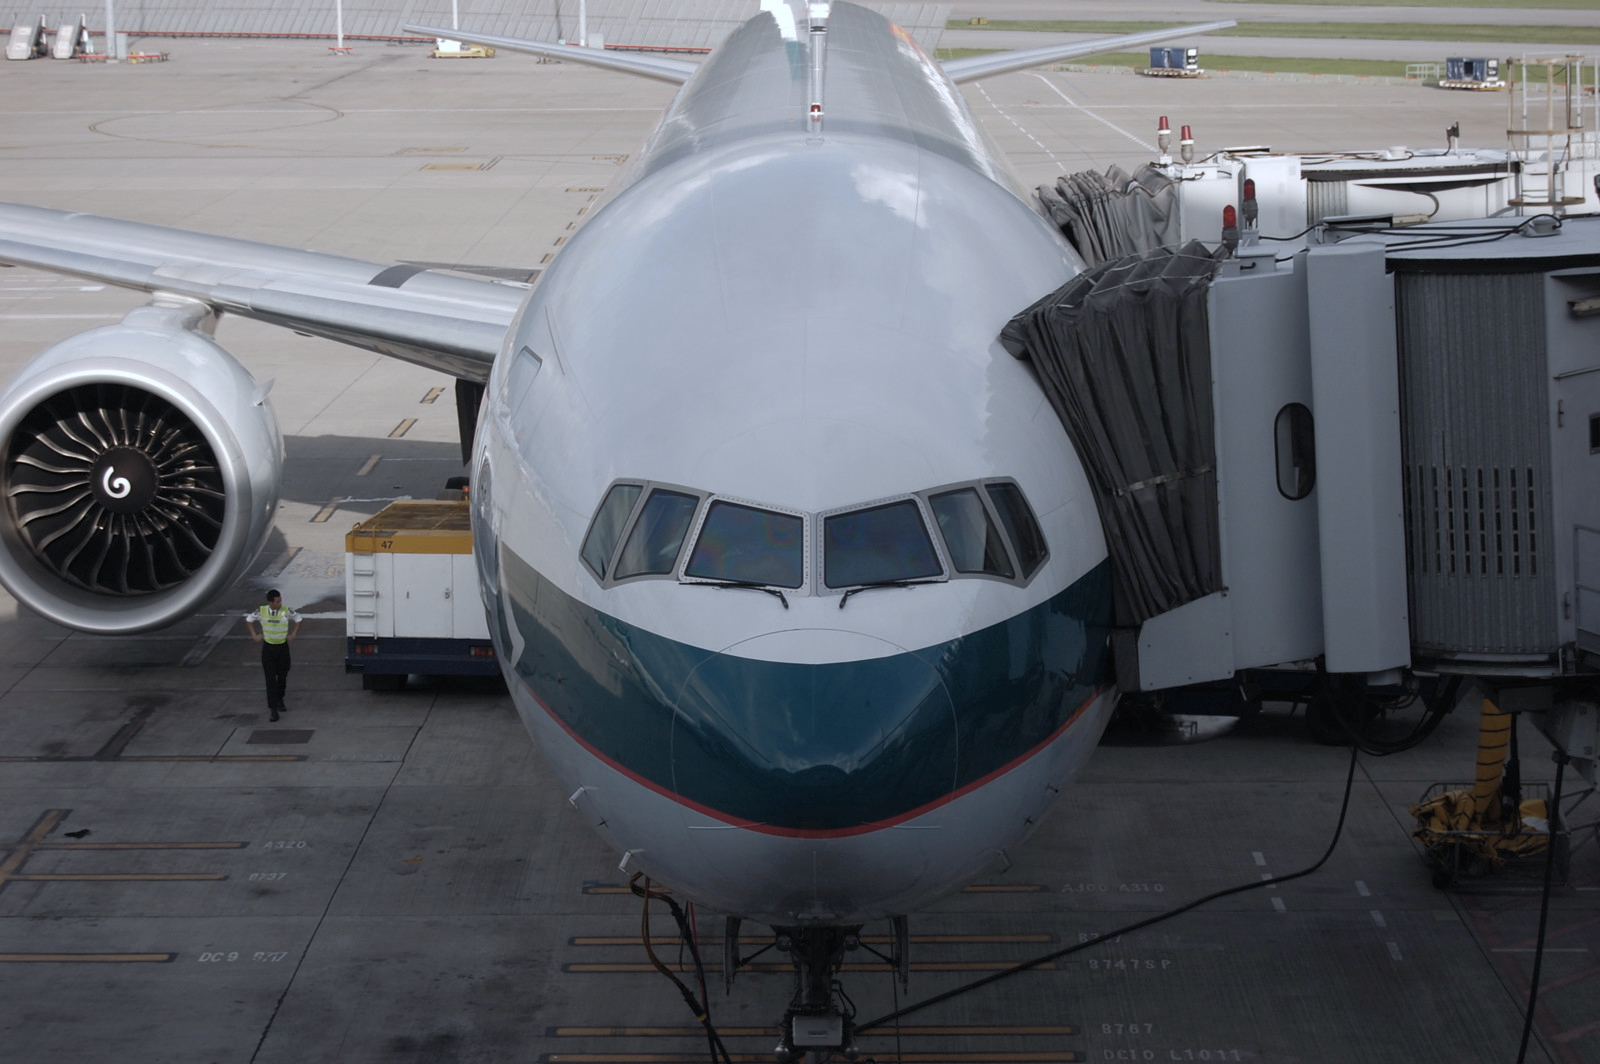 Picture of a Boeing 777-300ER at an airport gate